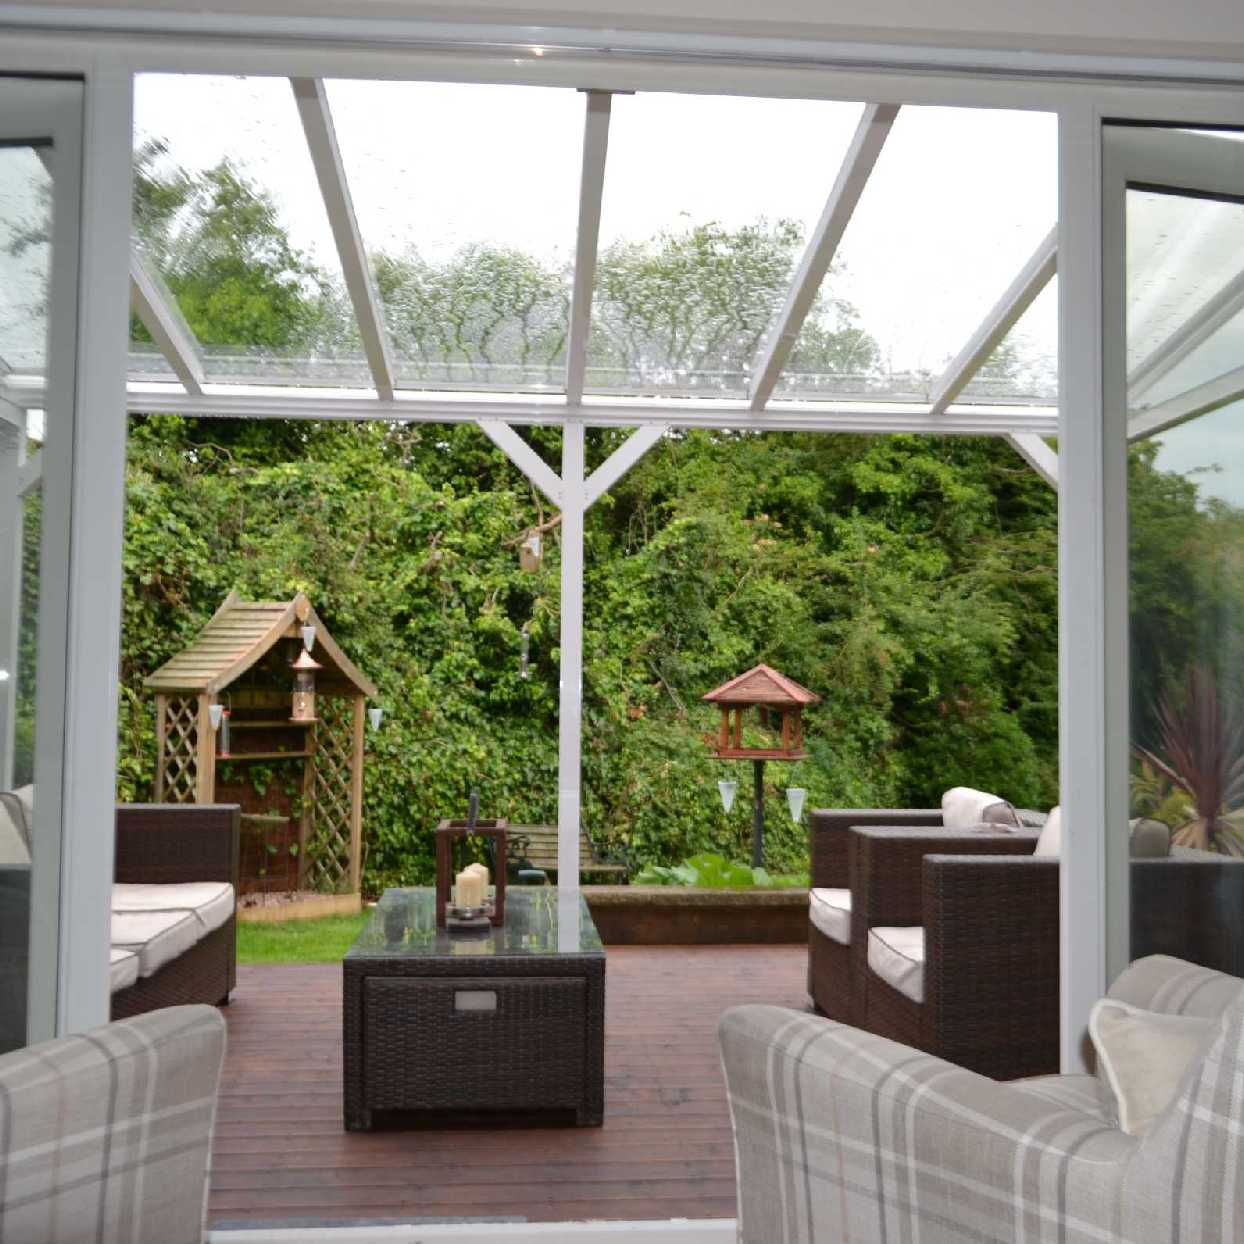 Buy Omega Smart Free-Standing, White MonoPitch Roof Canopy with 6mm Glass Clear Plate Polycarbonate Glazing - 4.2m (W) x 3.5m (P), (6) Supporting Posts online today